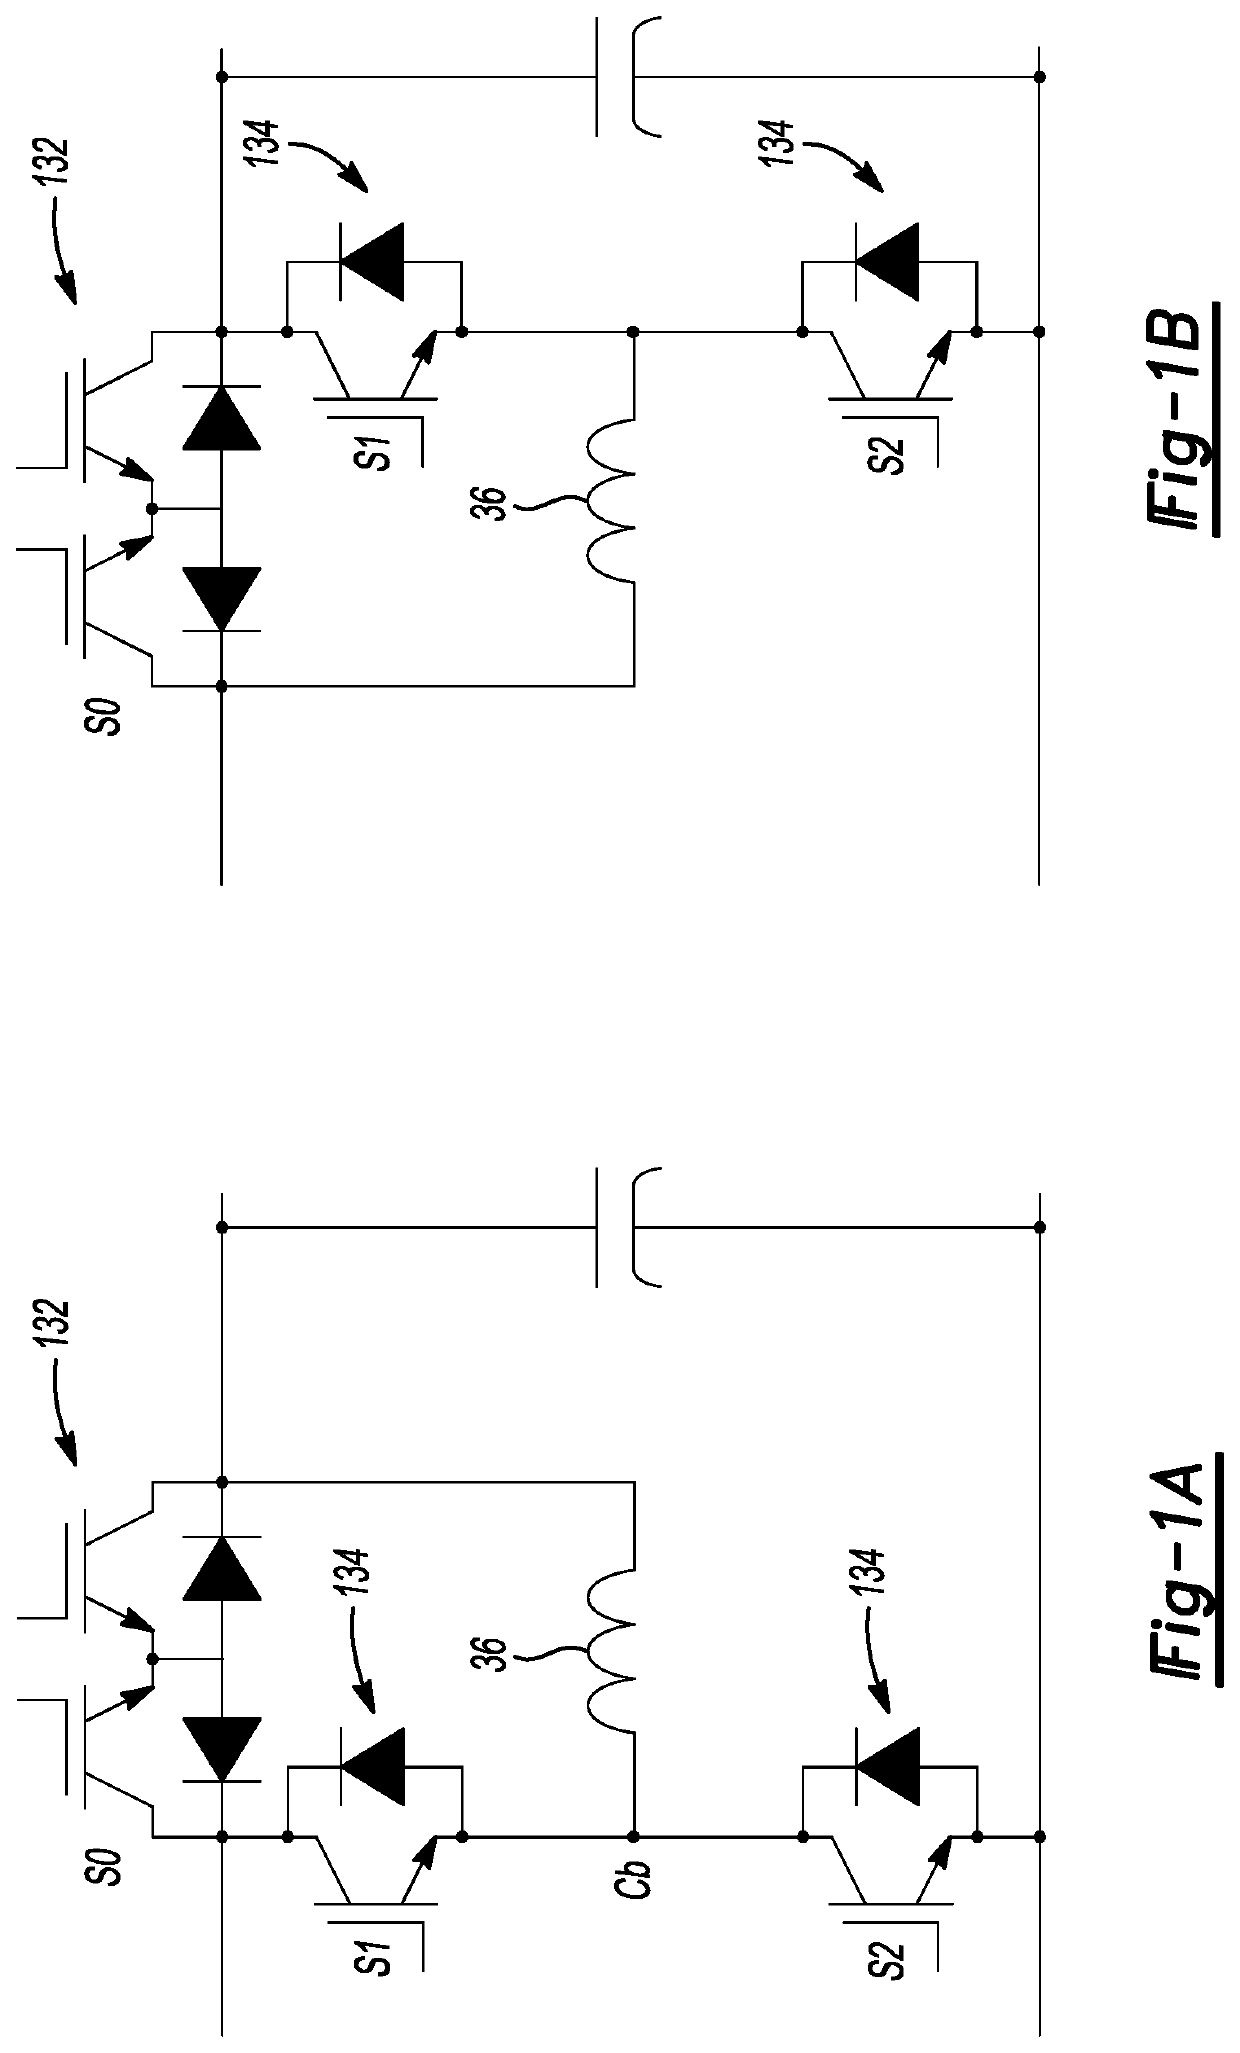 Operating mode optimization for electric propulsion system with downsized DC-DC converter